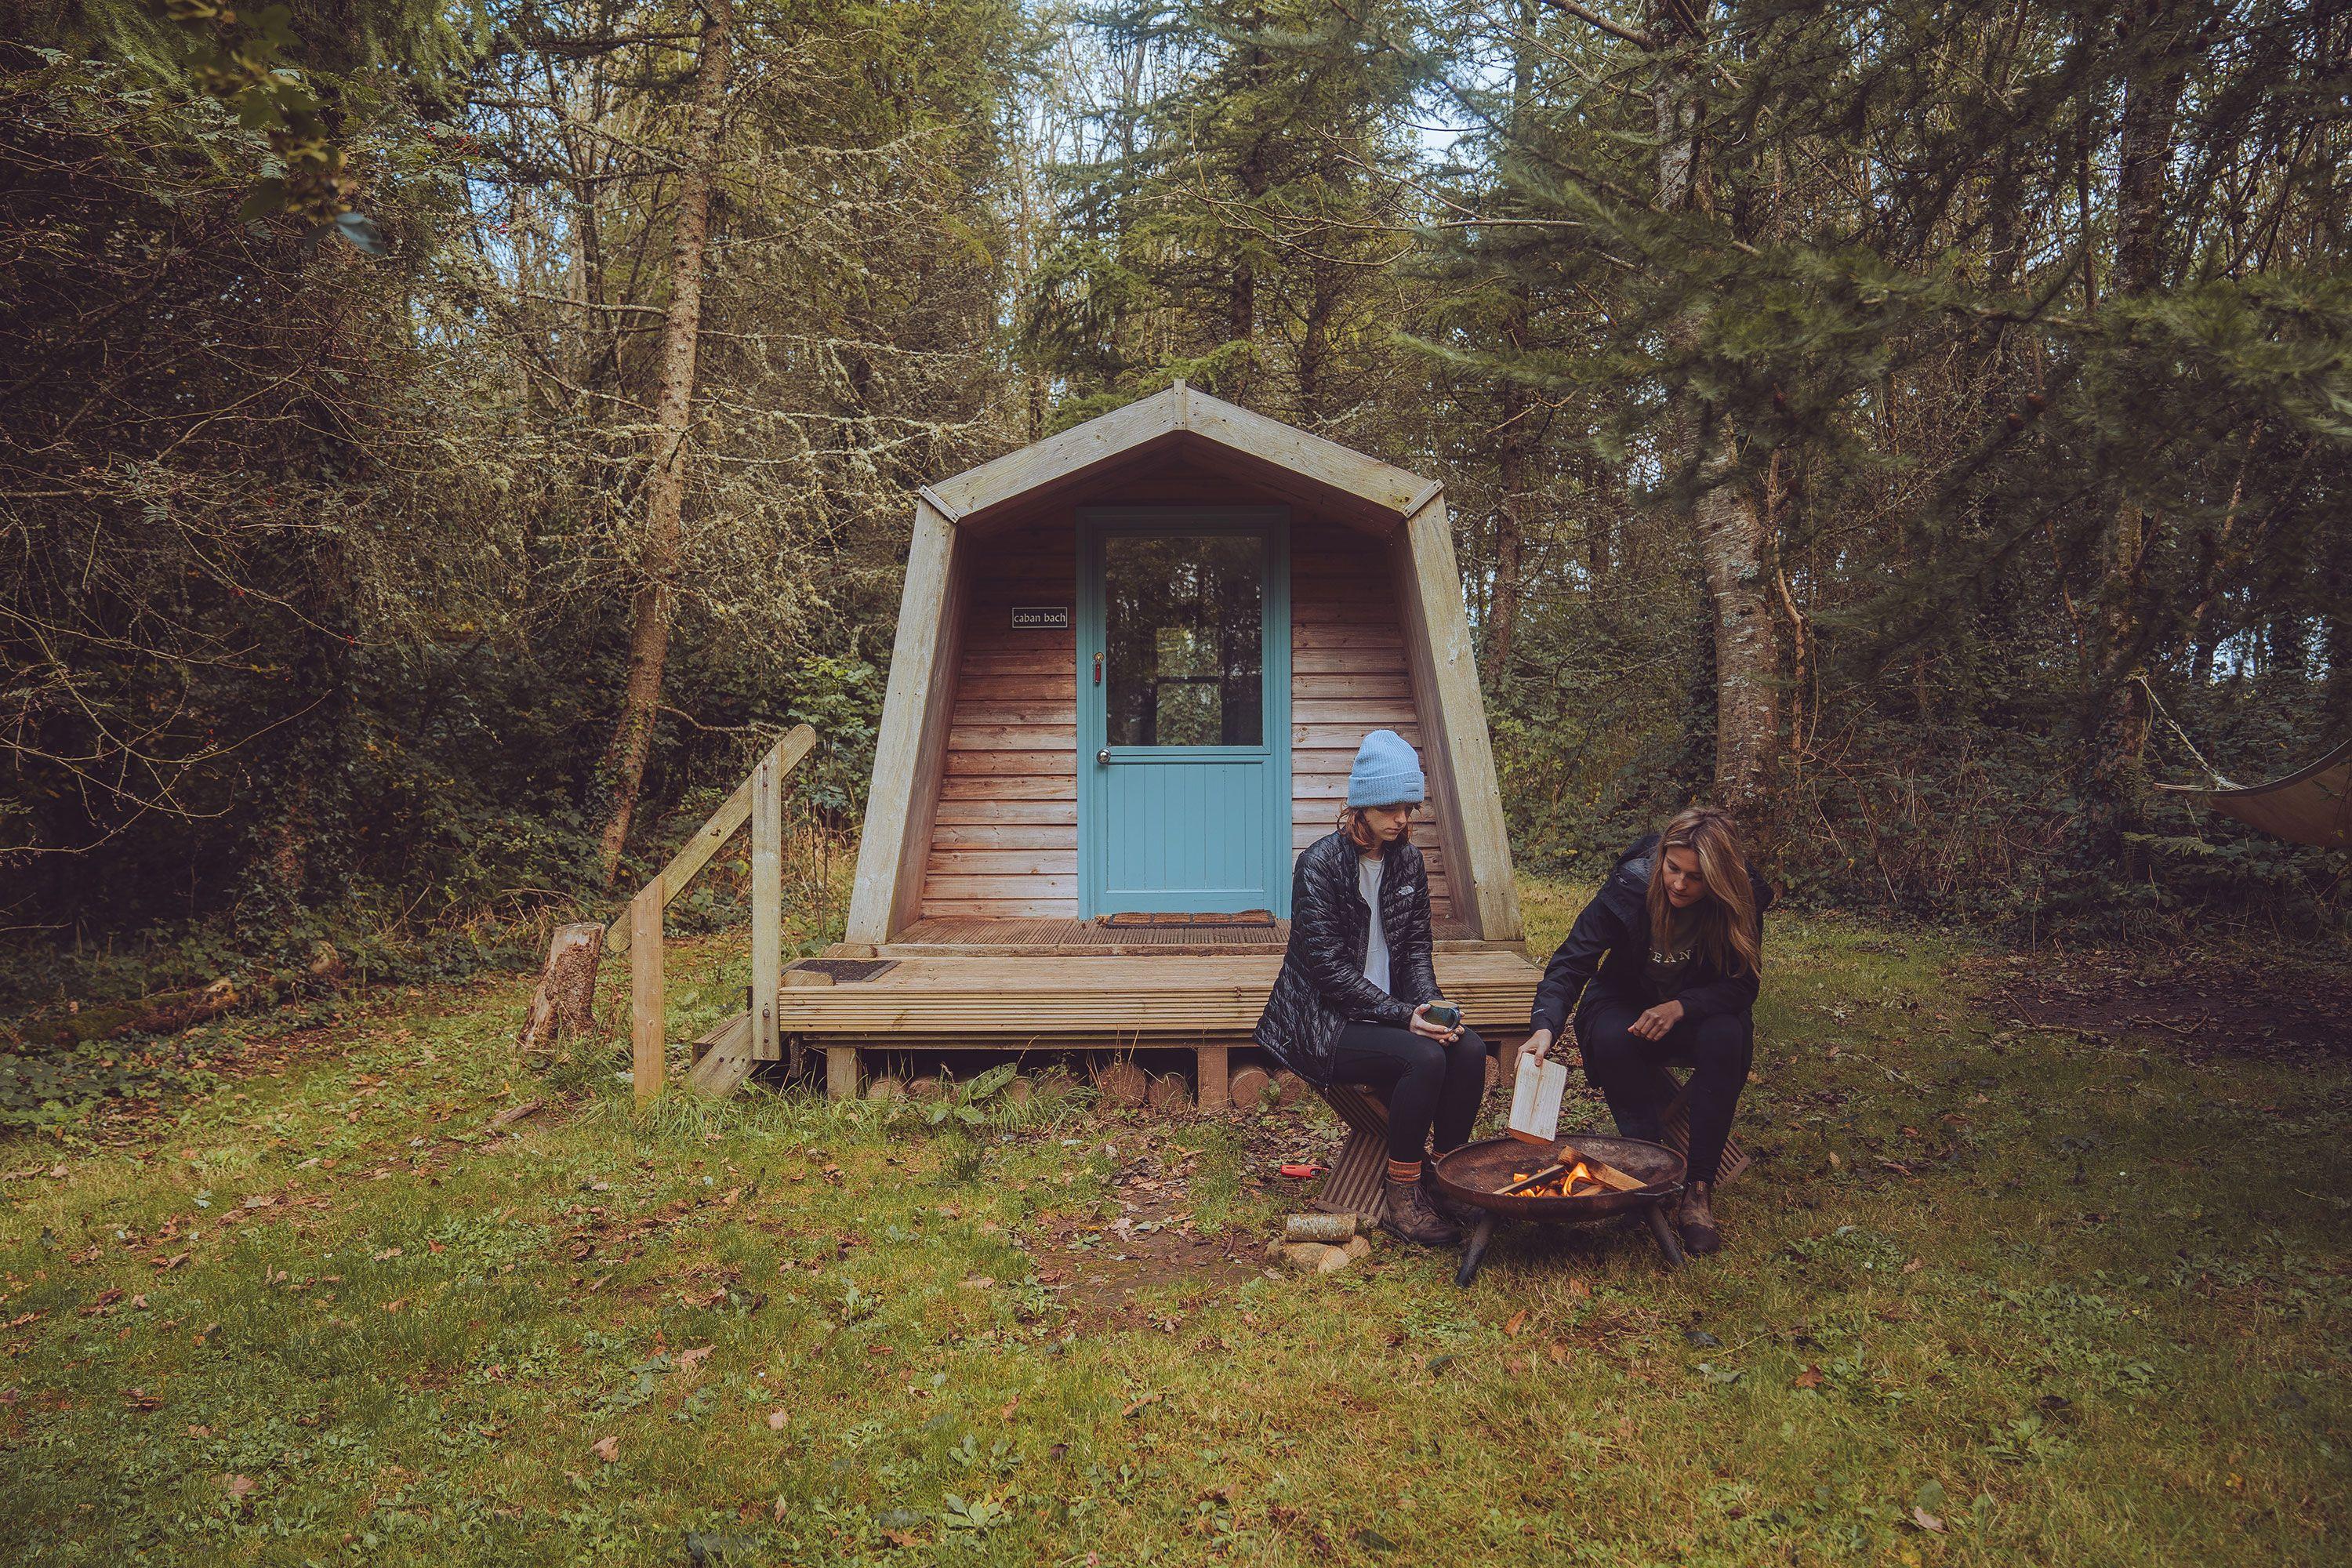 Two people sitting outside a cabin in the woods lighting a fire pit